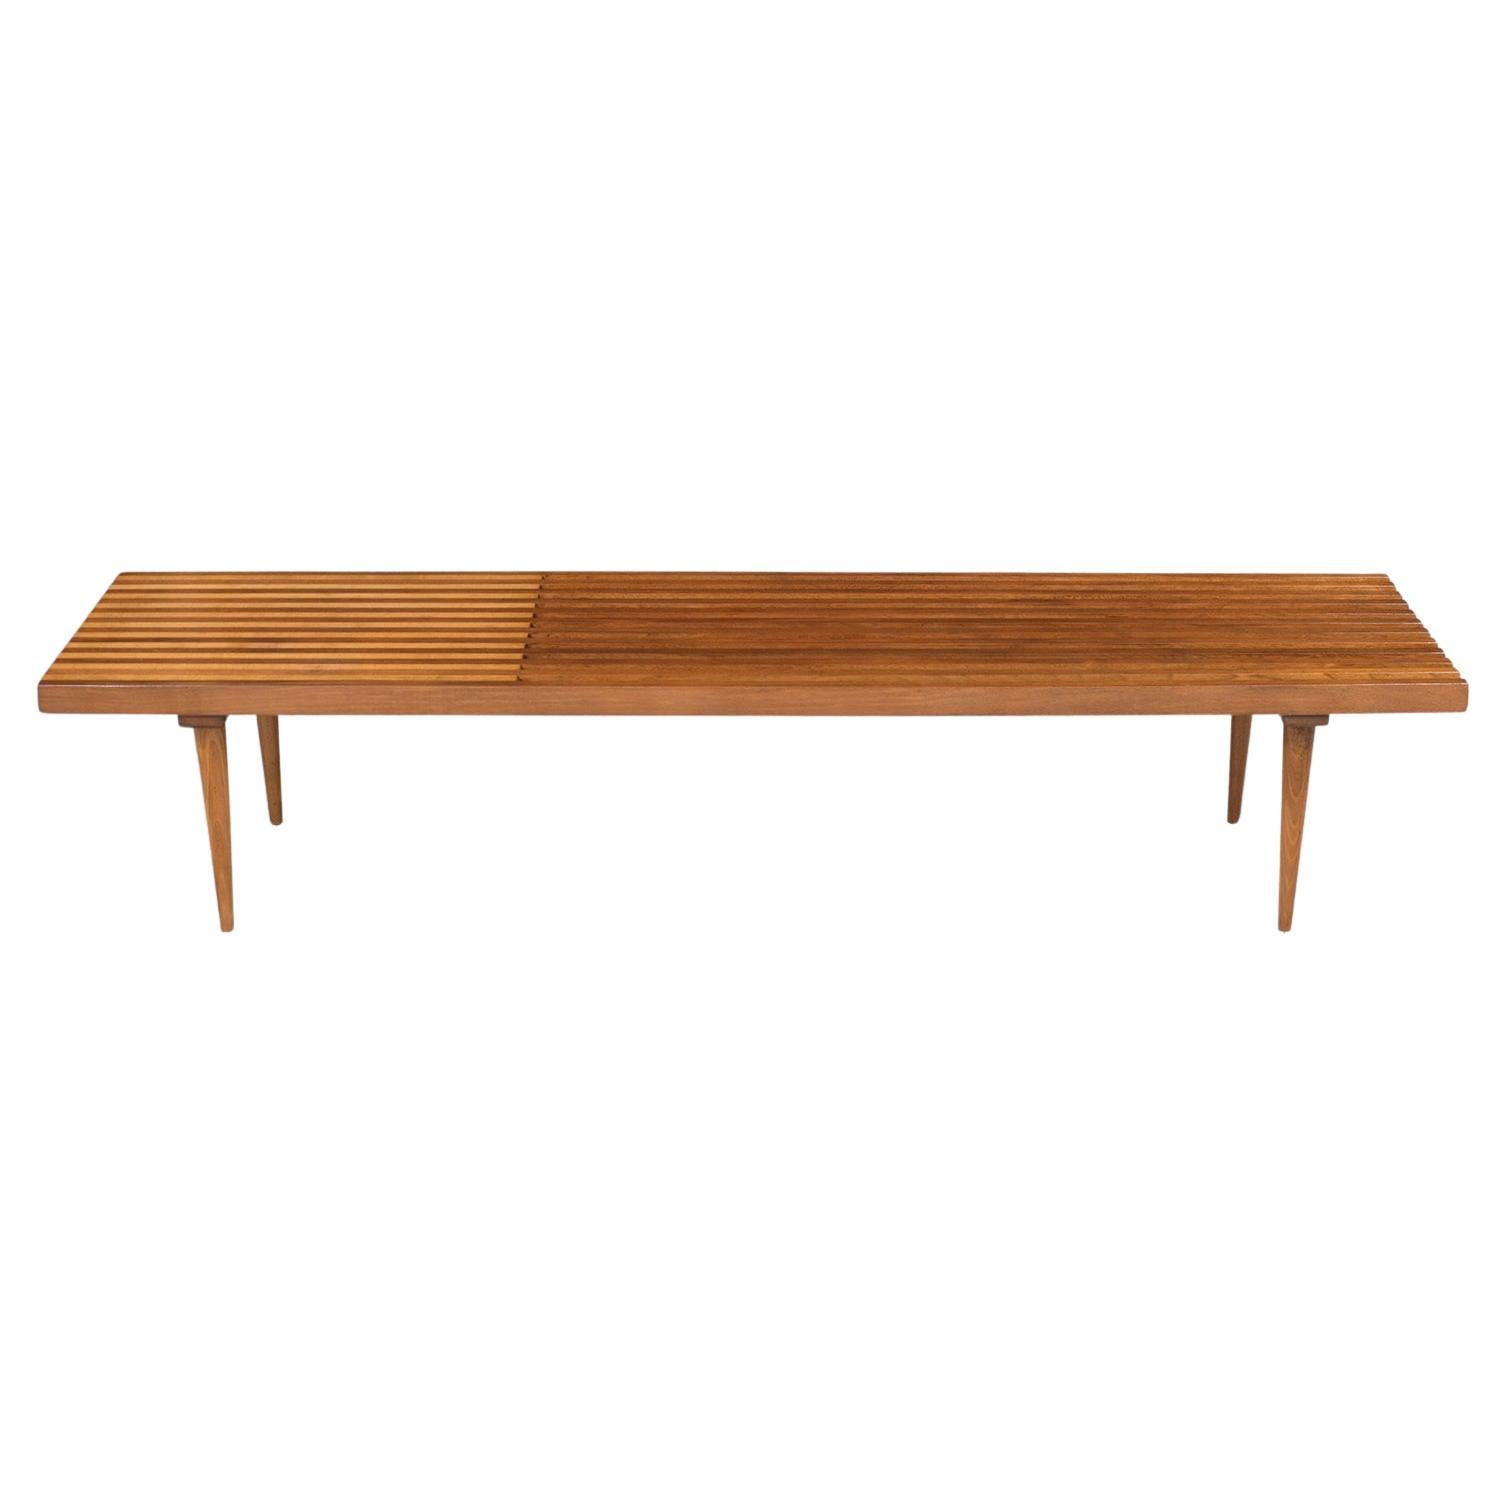 Introducing our masterfully restored Mid-Century Modern slatted bench, a symbol of exceptional craftsmanship in solid maple and walnut wood. The design exudes elegance with its clean, sleek lines, which have been brought to life with a fresh natural